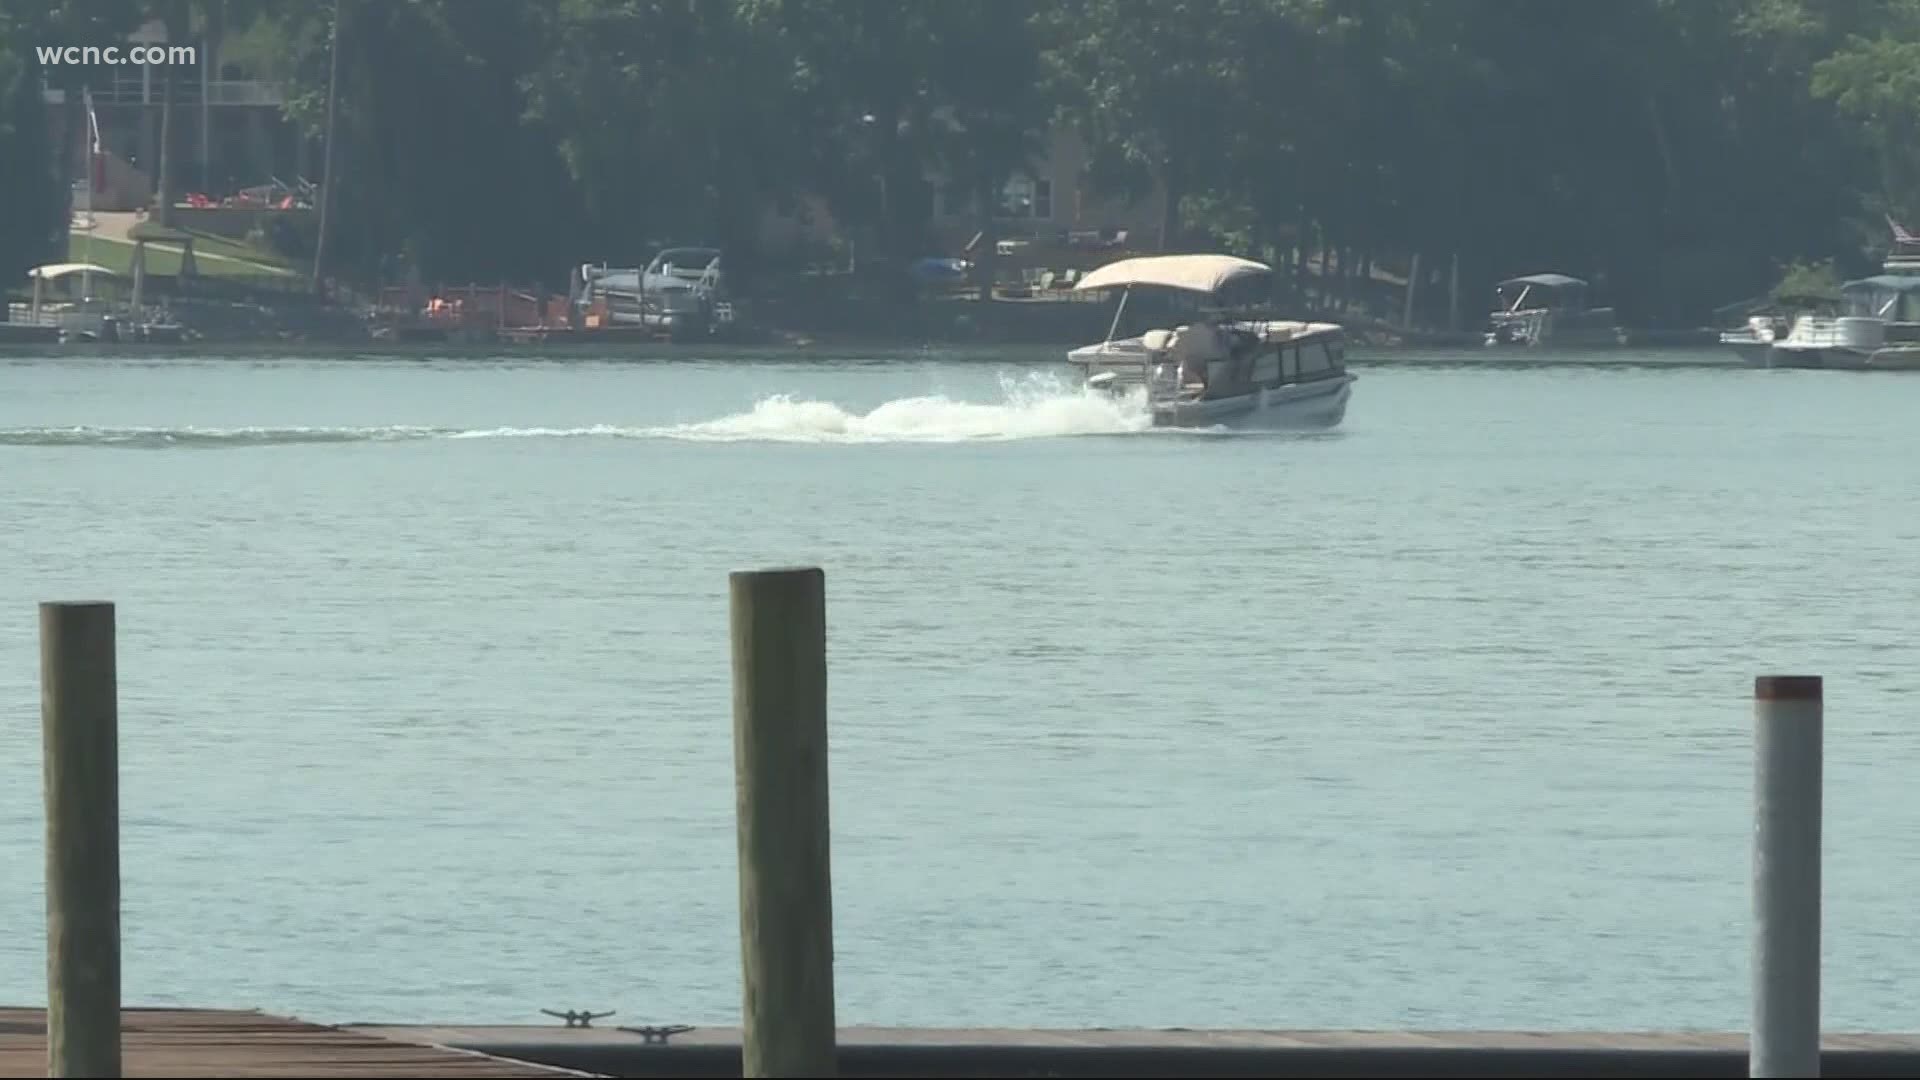 Summer fun comes with risks out on the water. Several companies are offering safety features to keep your family safe while out on the lakes.